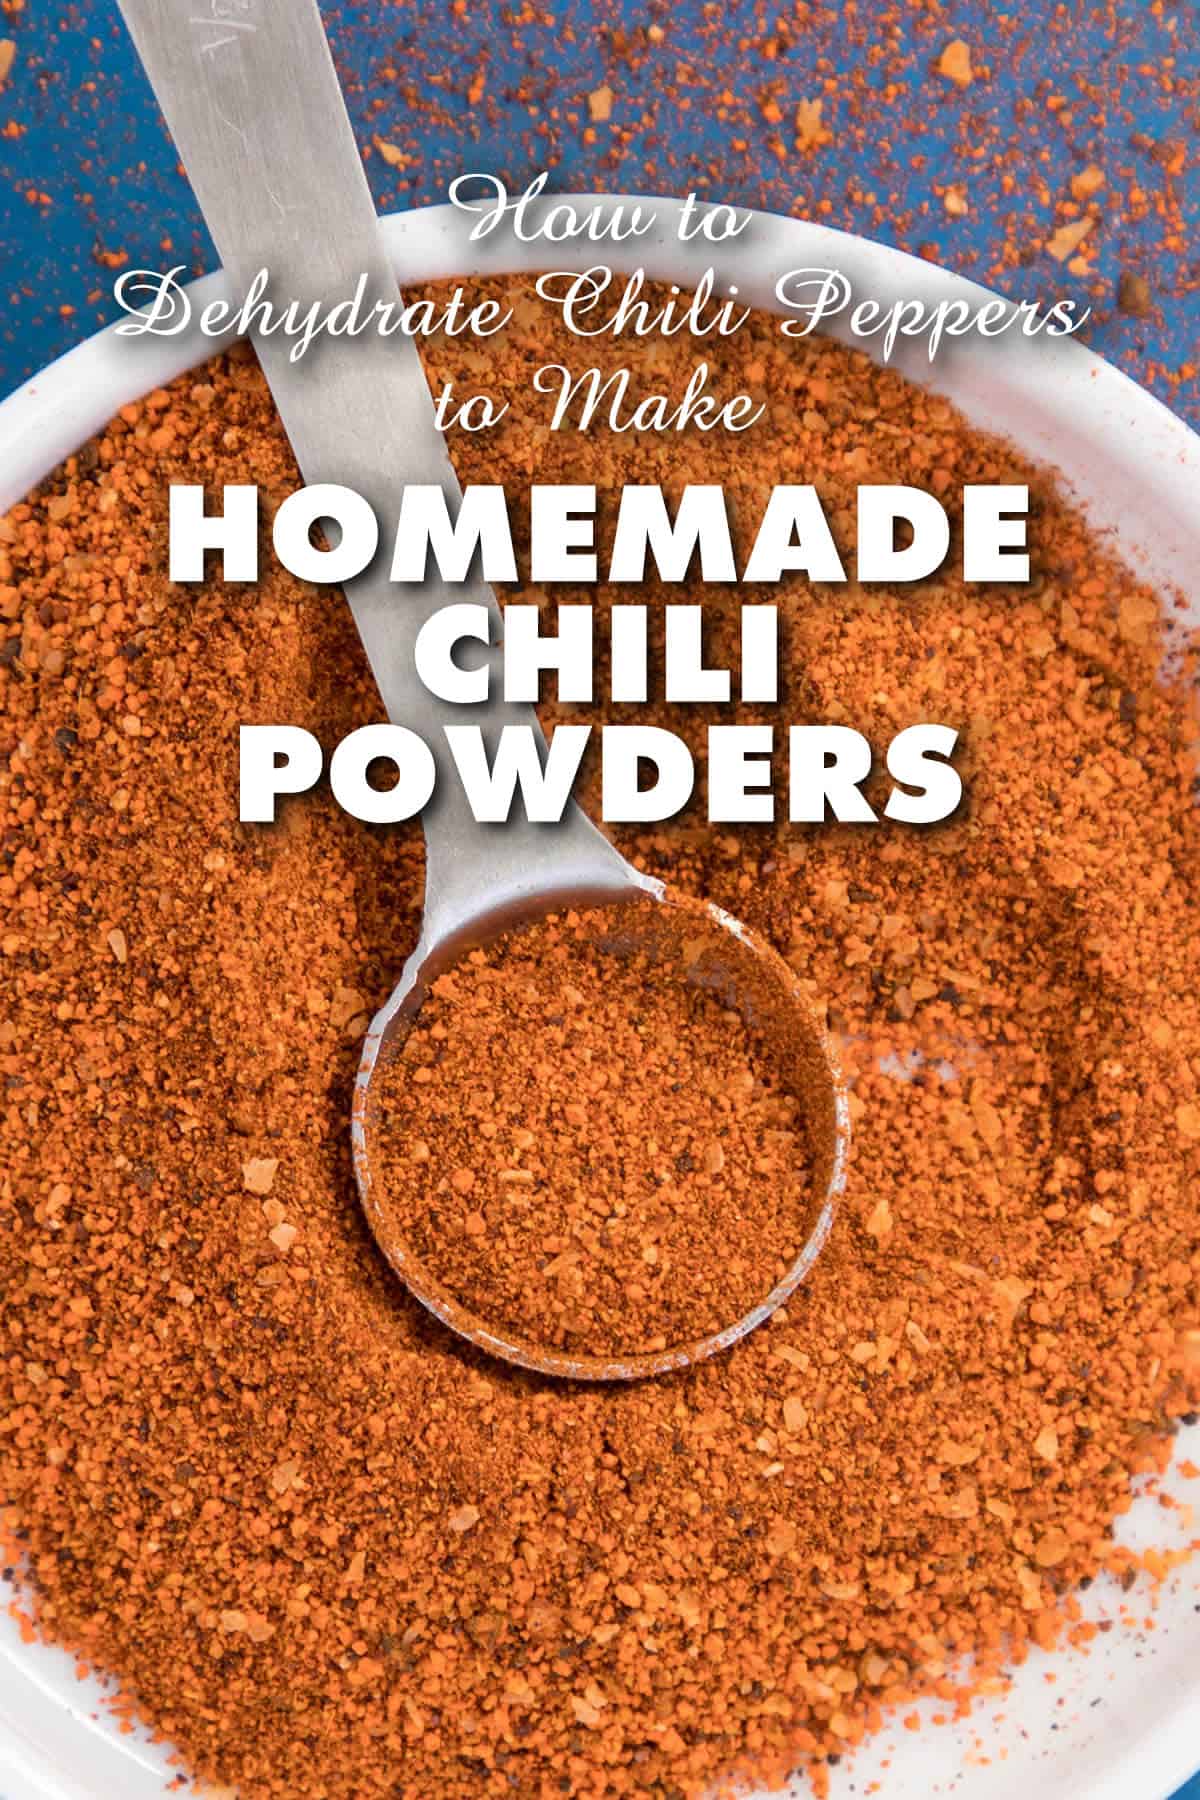 How to Dehydrate Chili Peppers to Make Homemade Chili Powders